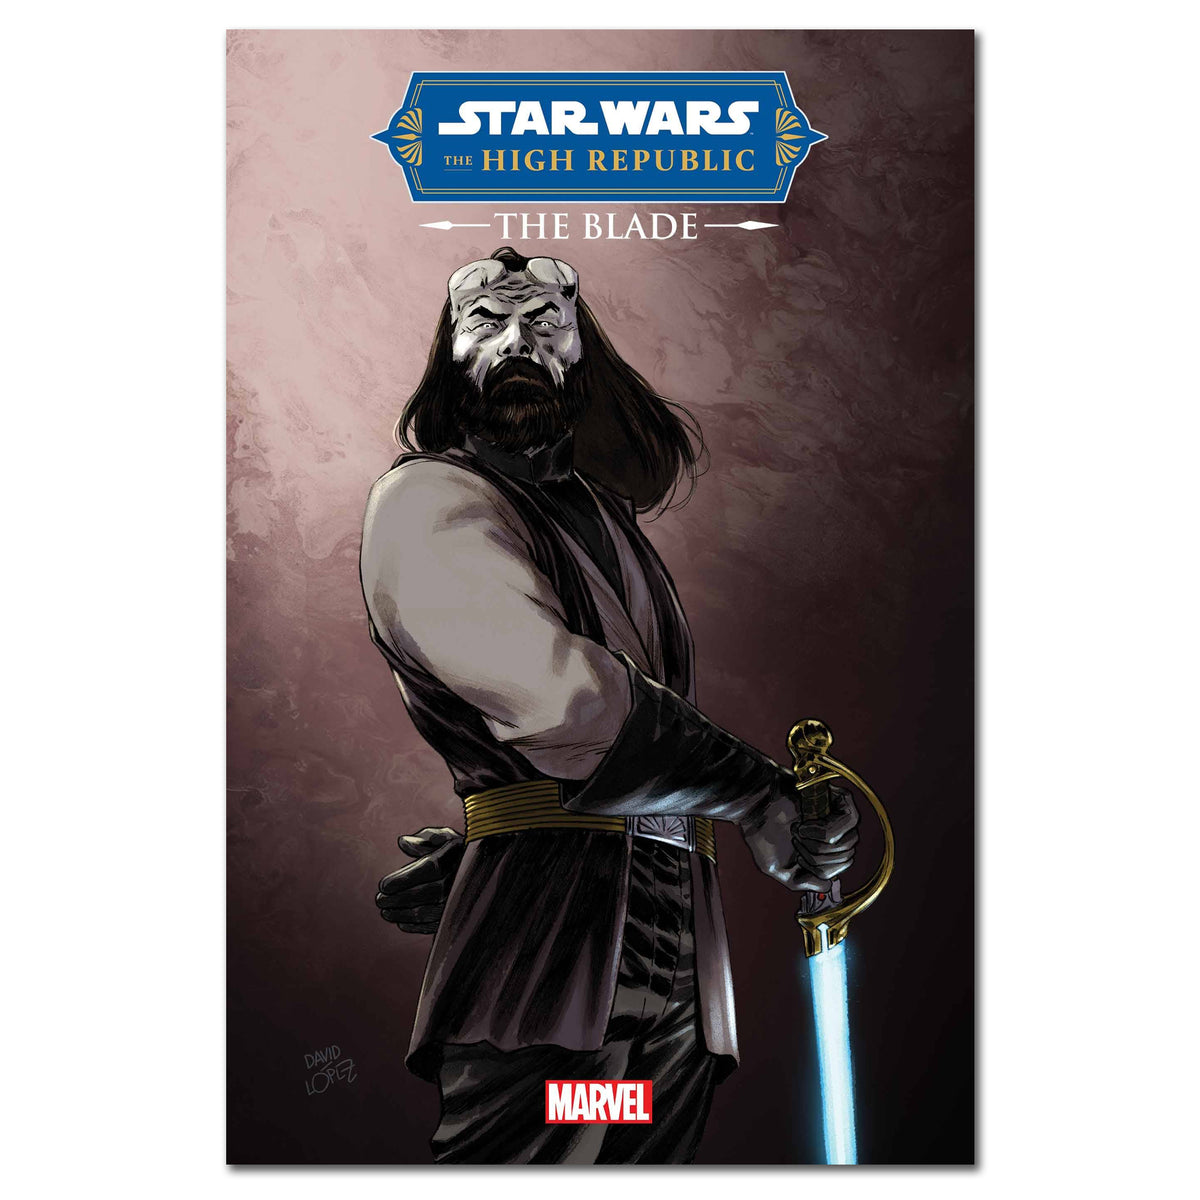 Star Wars The High Republic The Blade #2 (of 4) Cover Variant LOPEZ FINALSALE